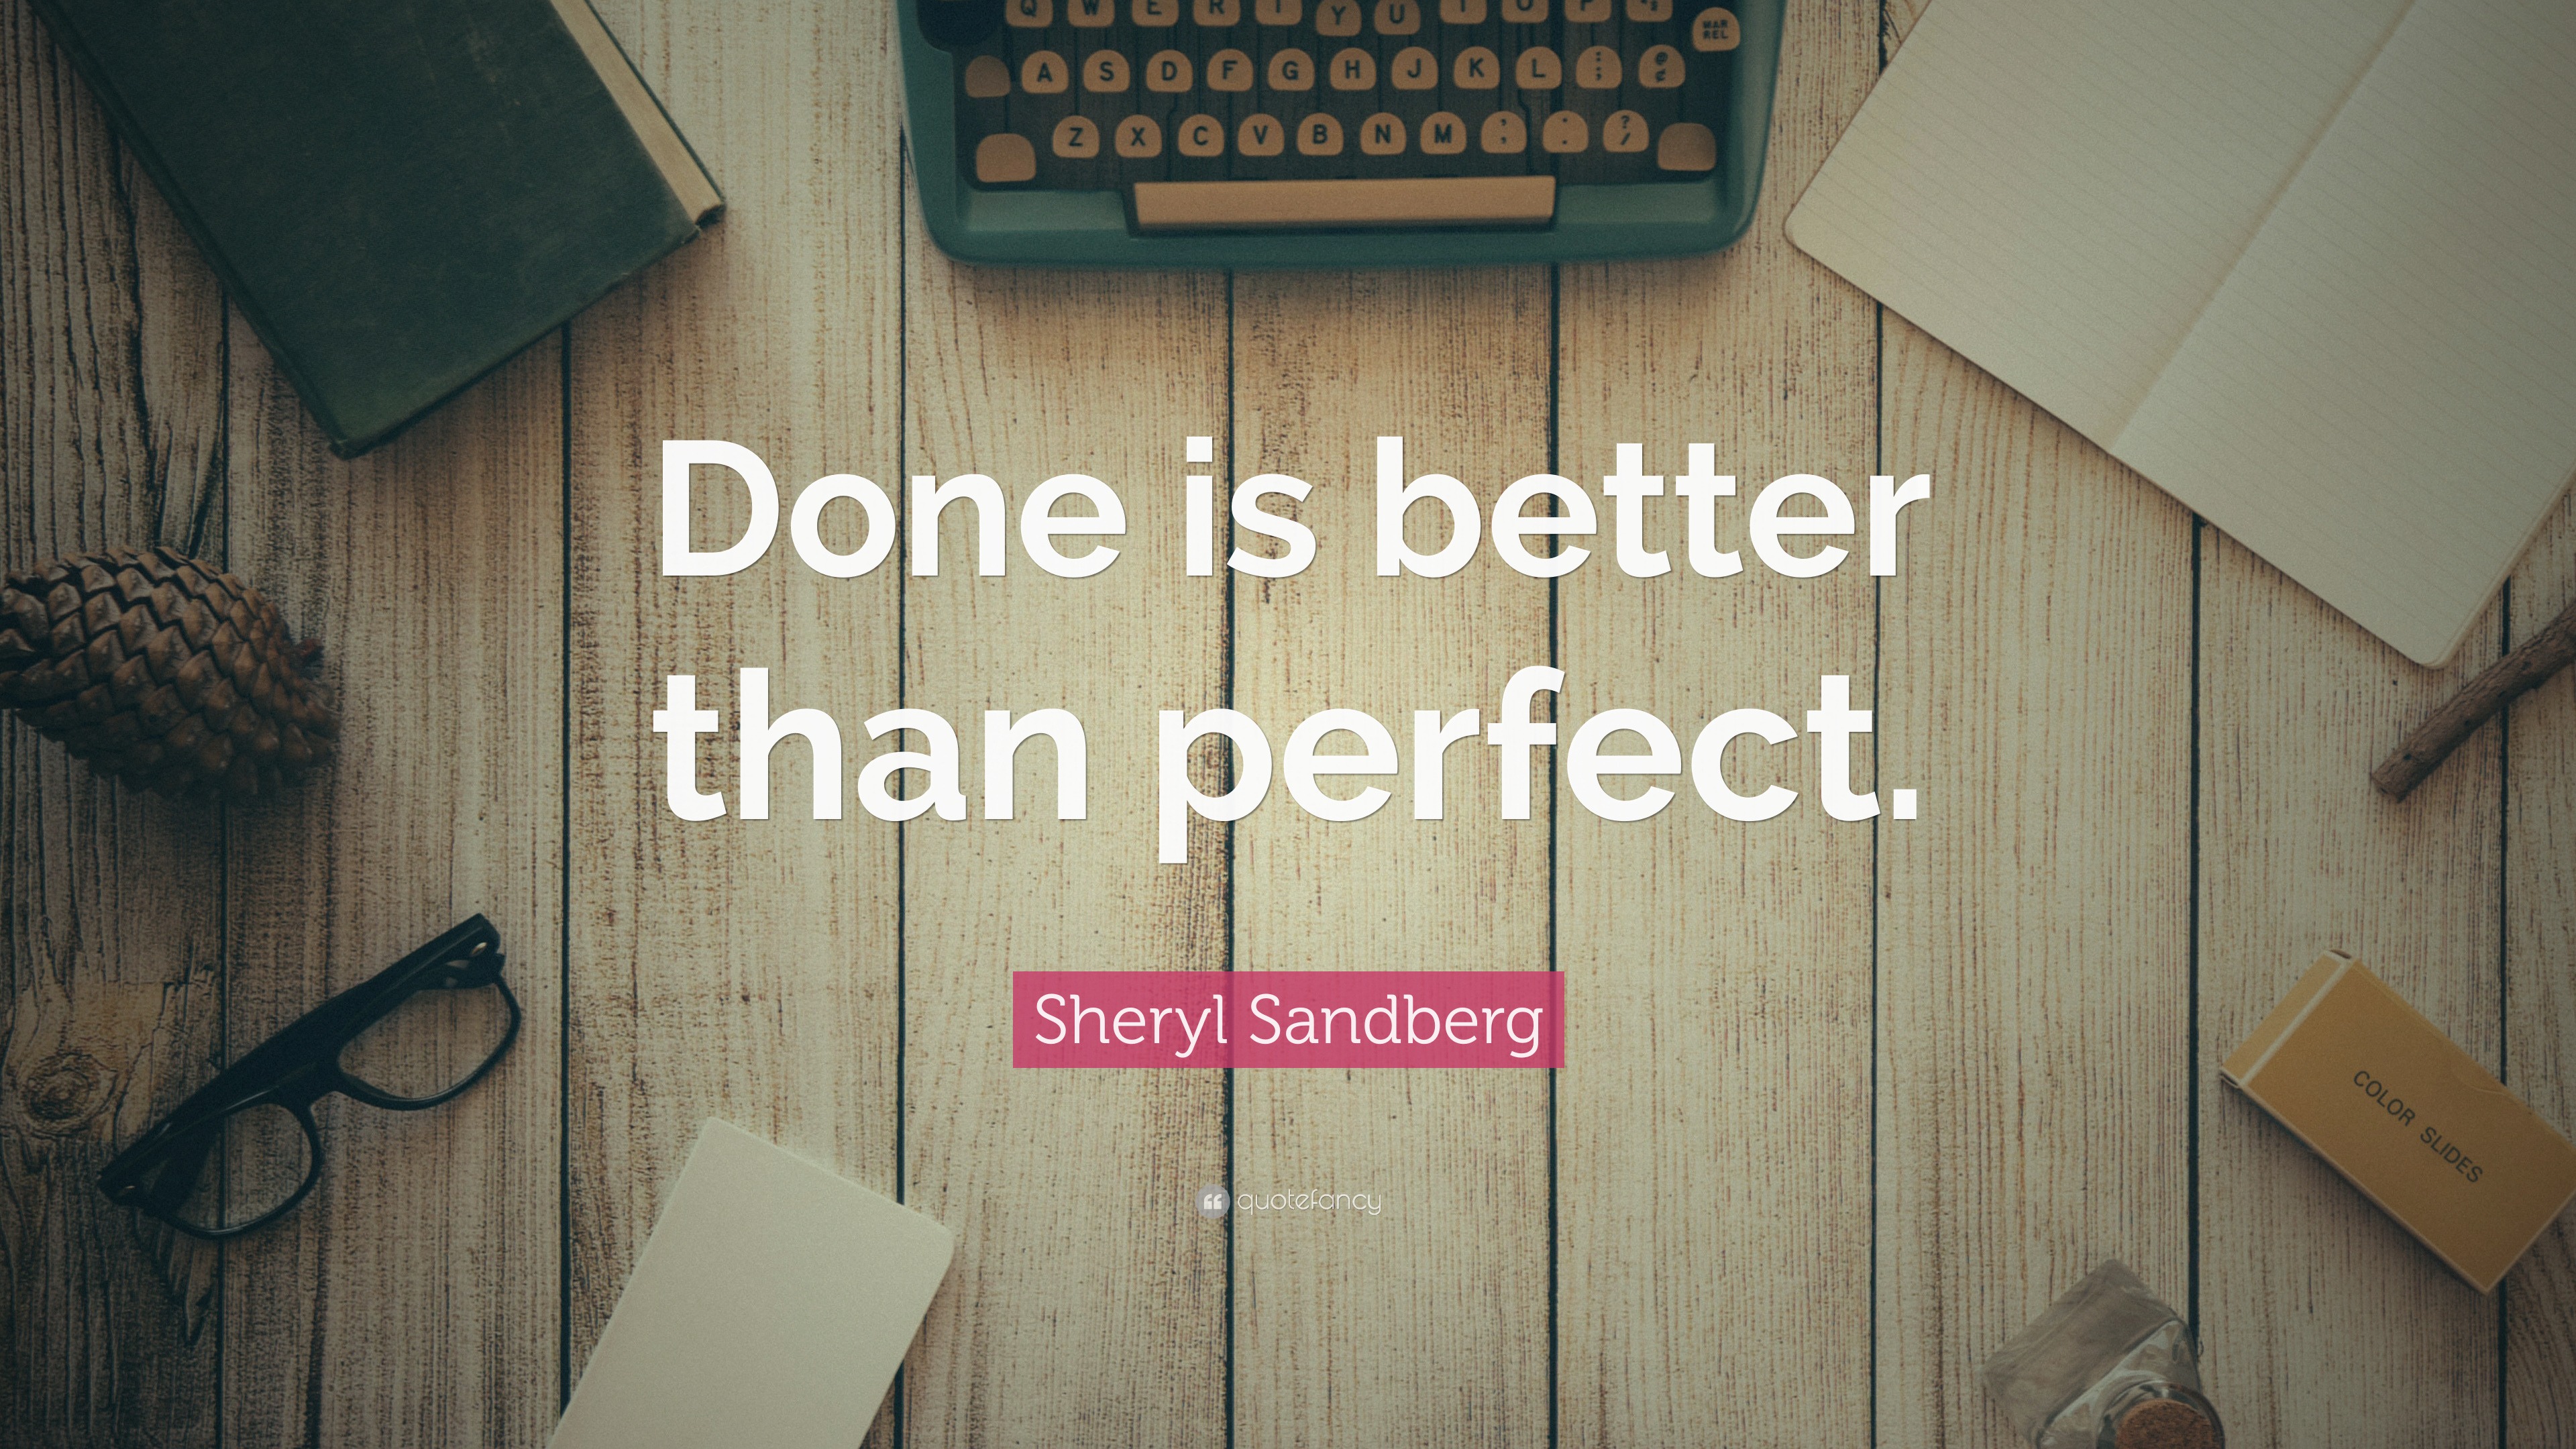 Sheryl Sandberg Quote: “Done is better than perfect.” (23 wallpapers) - Quotefancy3840 x 2160